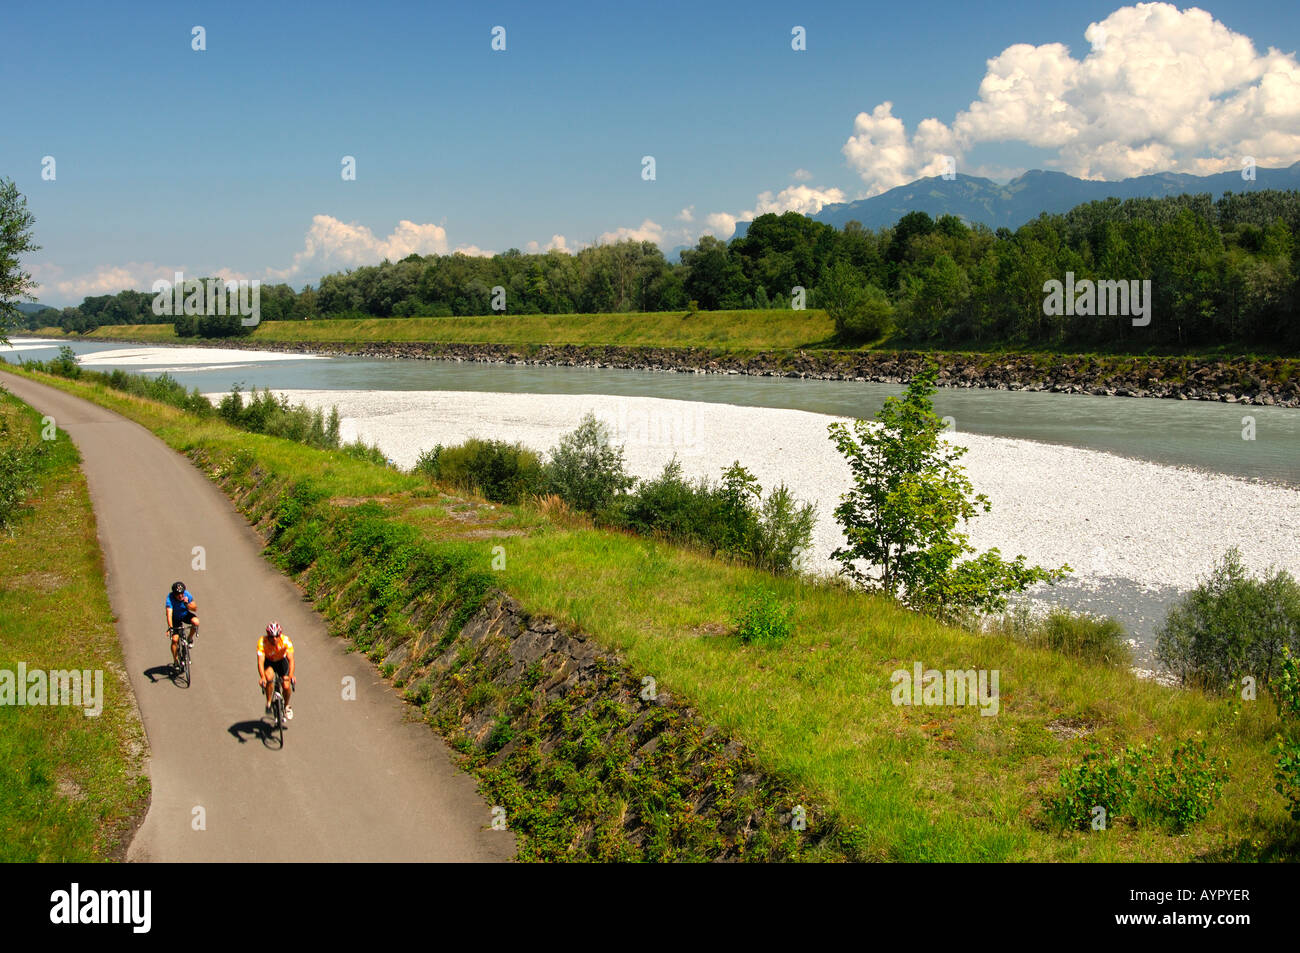 Cyclists in the Rhine River Valley, view from the left bank (Swiss side) toward Liechtenstein on the right bank Stock Photo